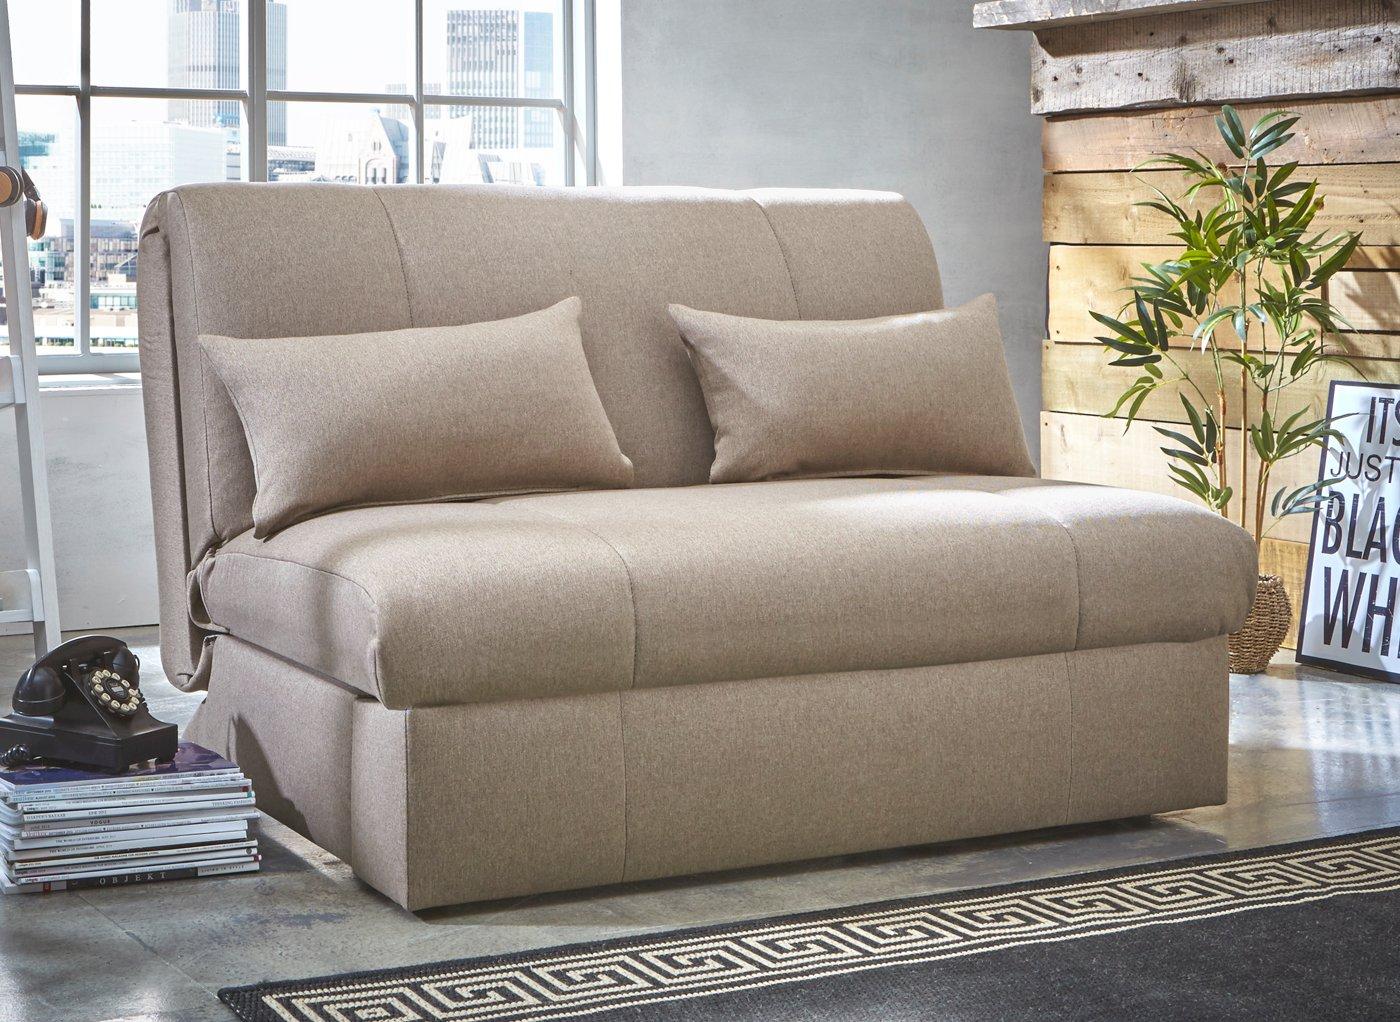 kelso small double sofa bed natural